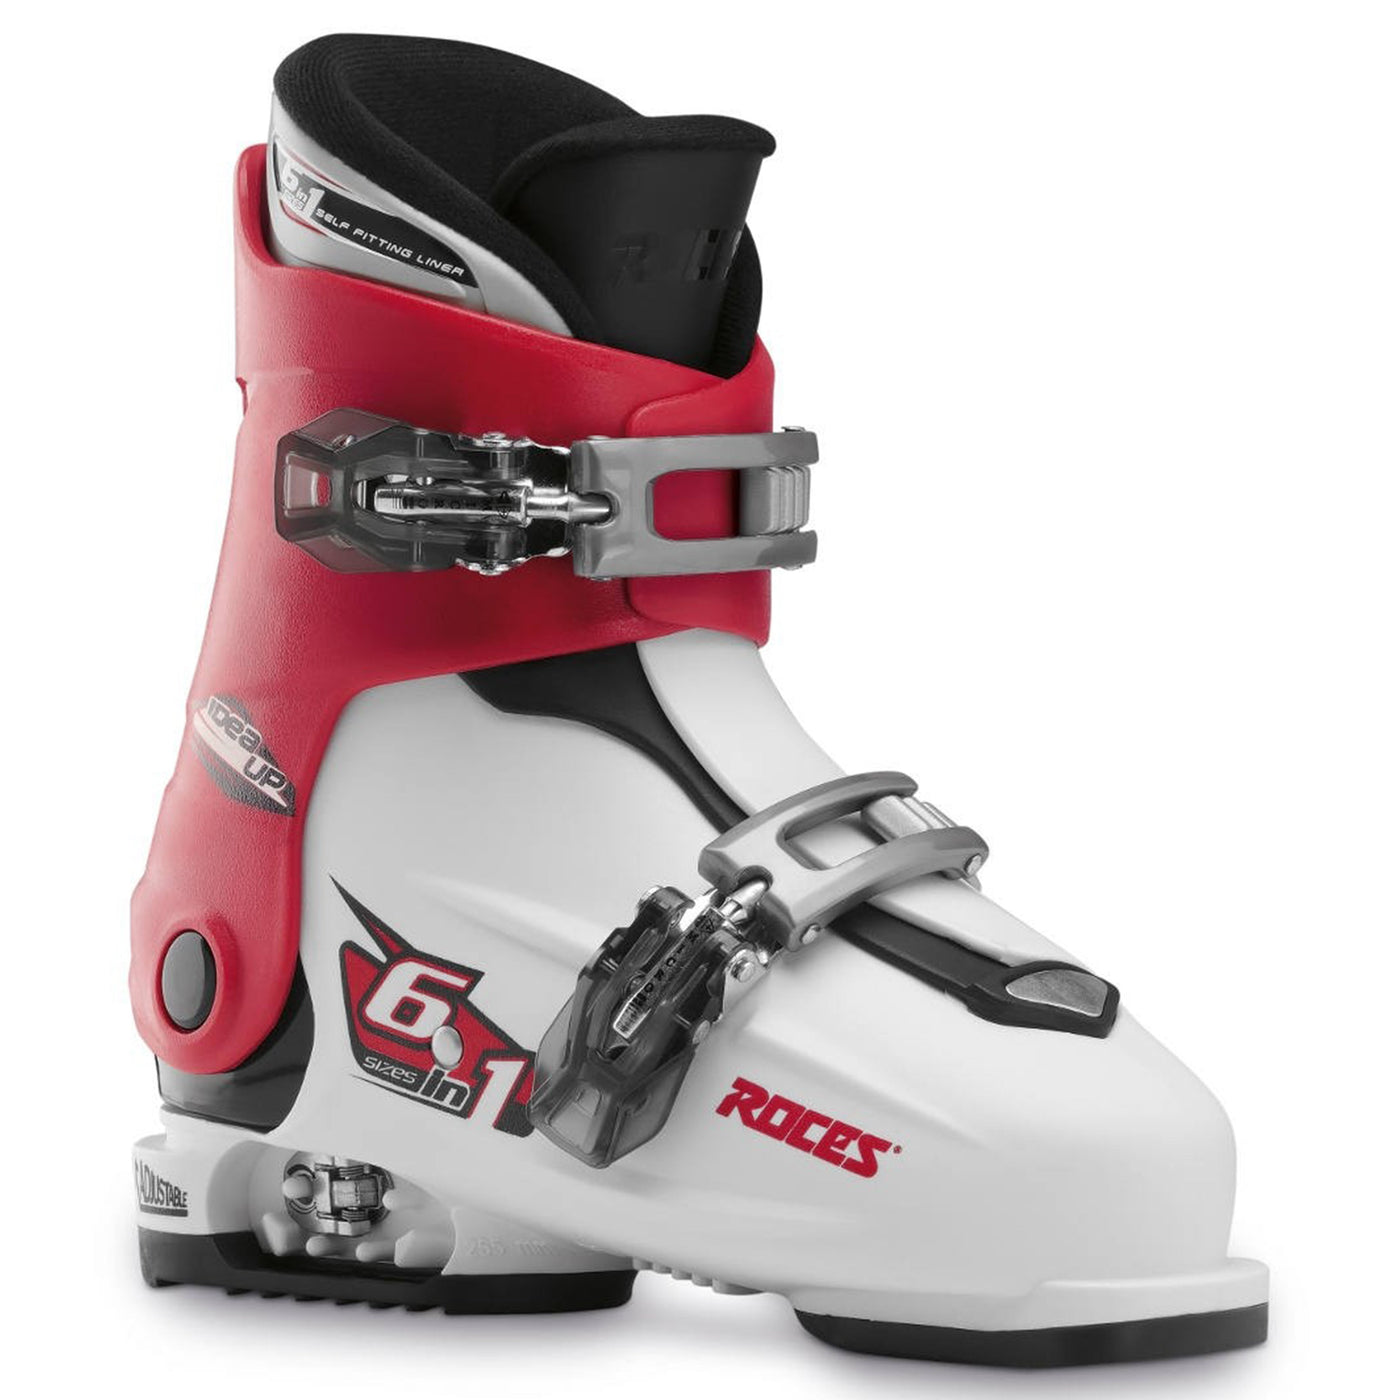 Roces IDEA Up Adjustable Youth Ski Boots | Size 19.0 - 22.0 MP - (OPEN BOX RETURN) SKI BOOTS Roces White/Red/Black  